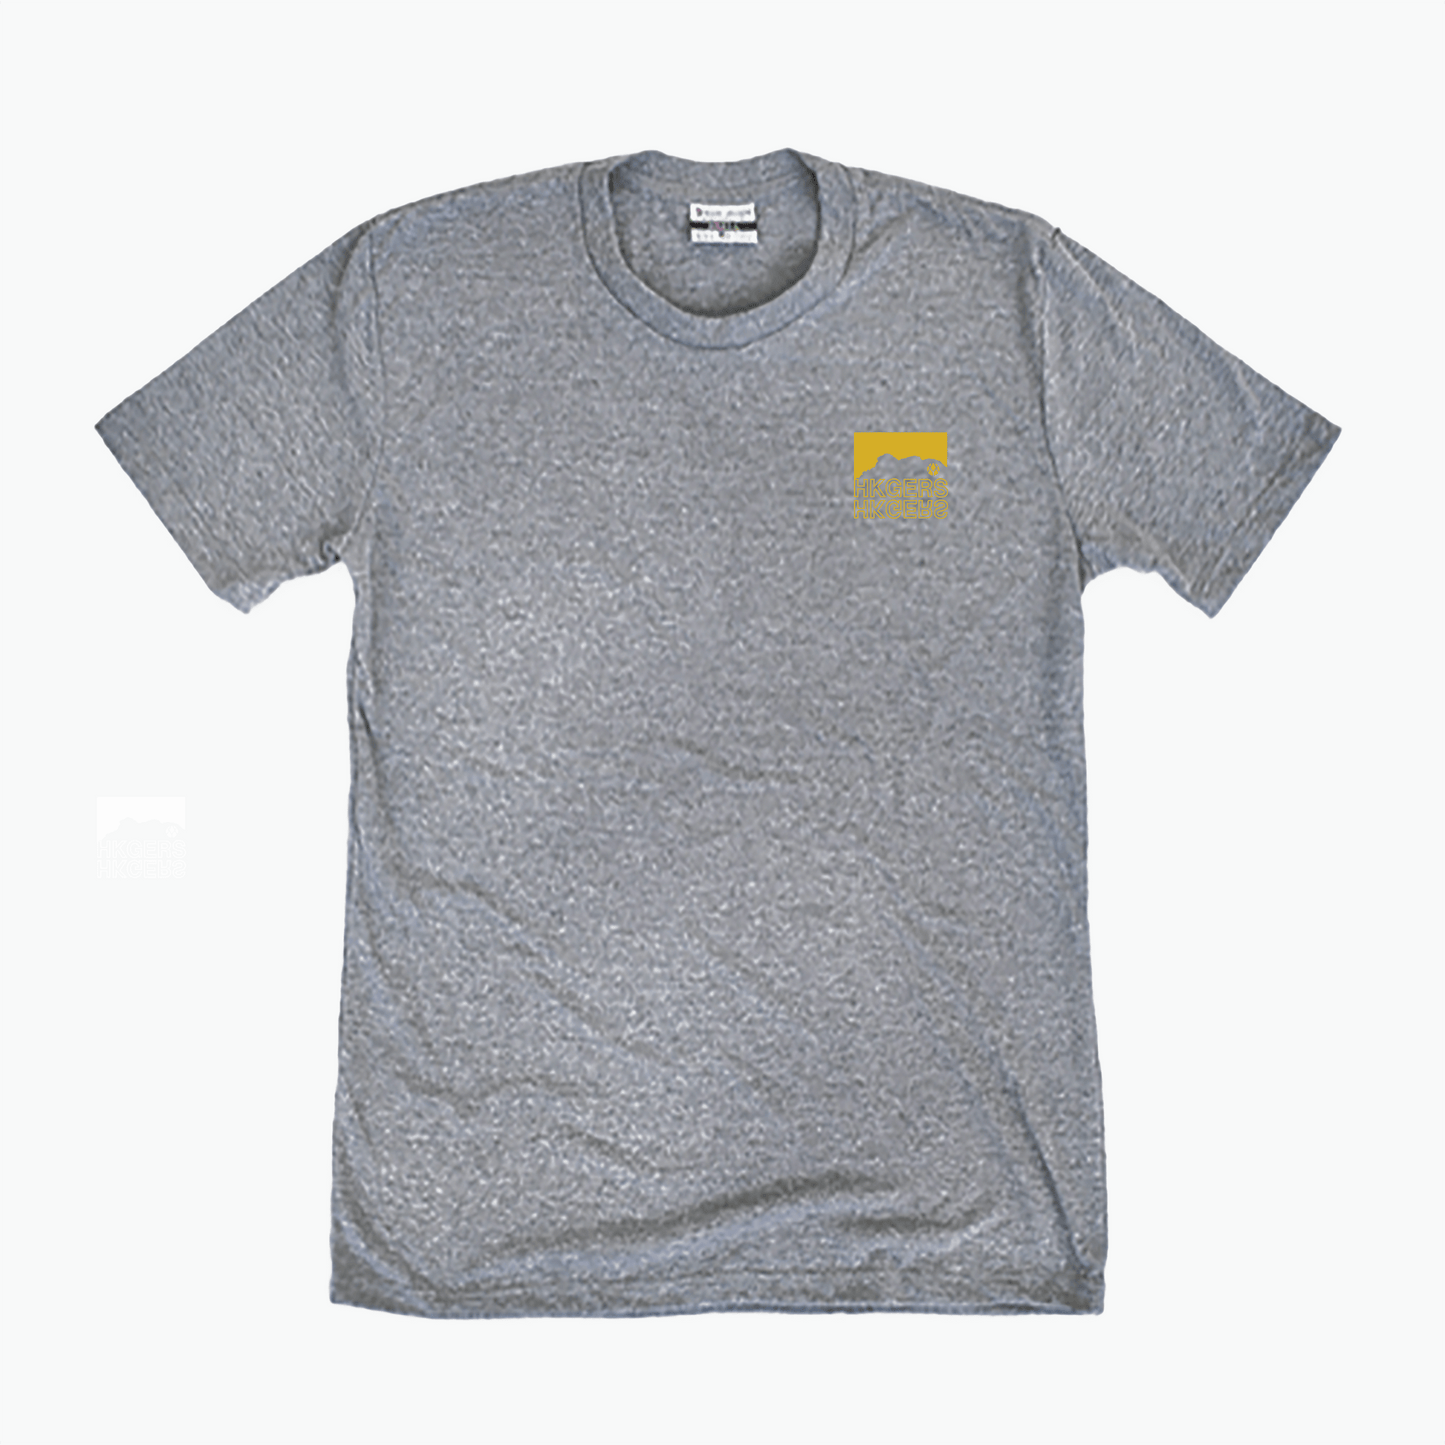 HKGERS T-Shirt (Gray) - A Yellow Object